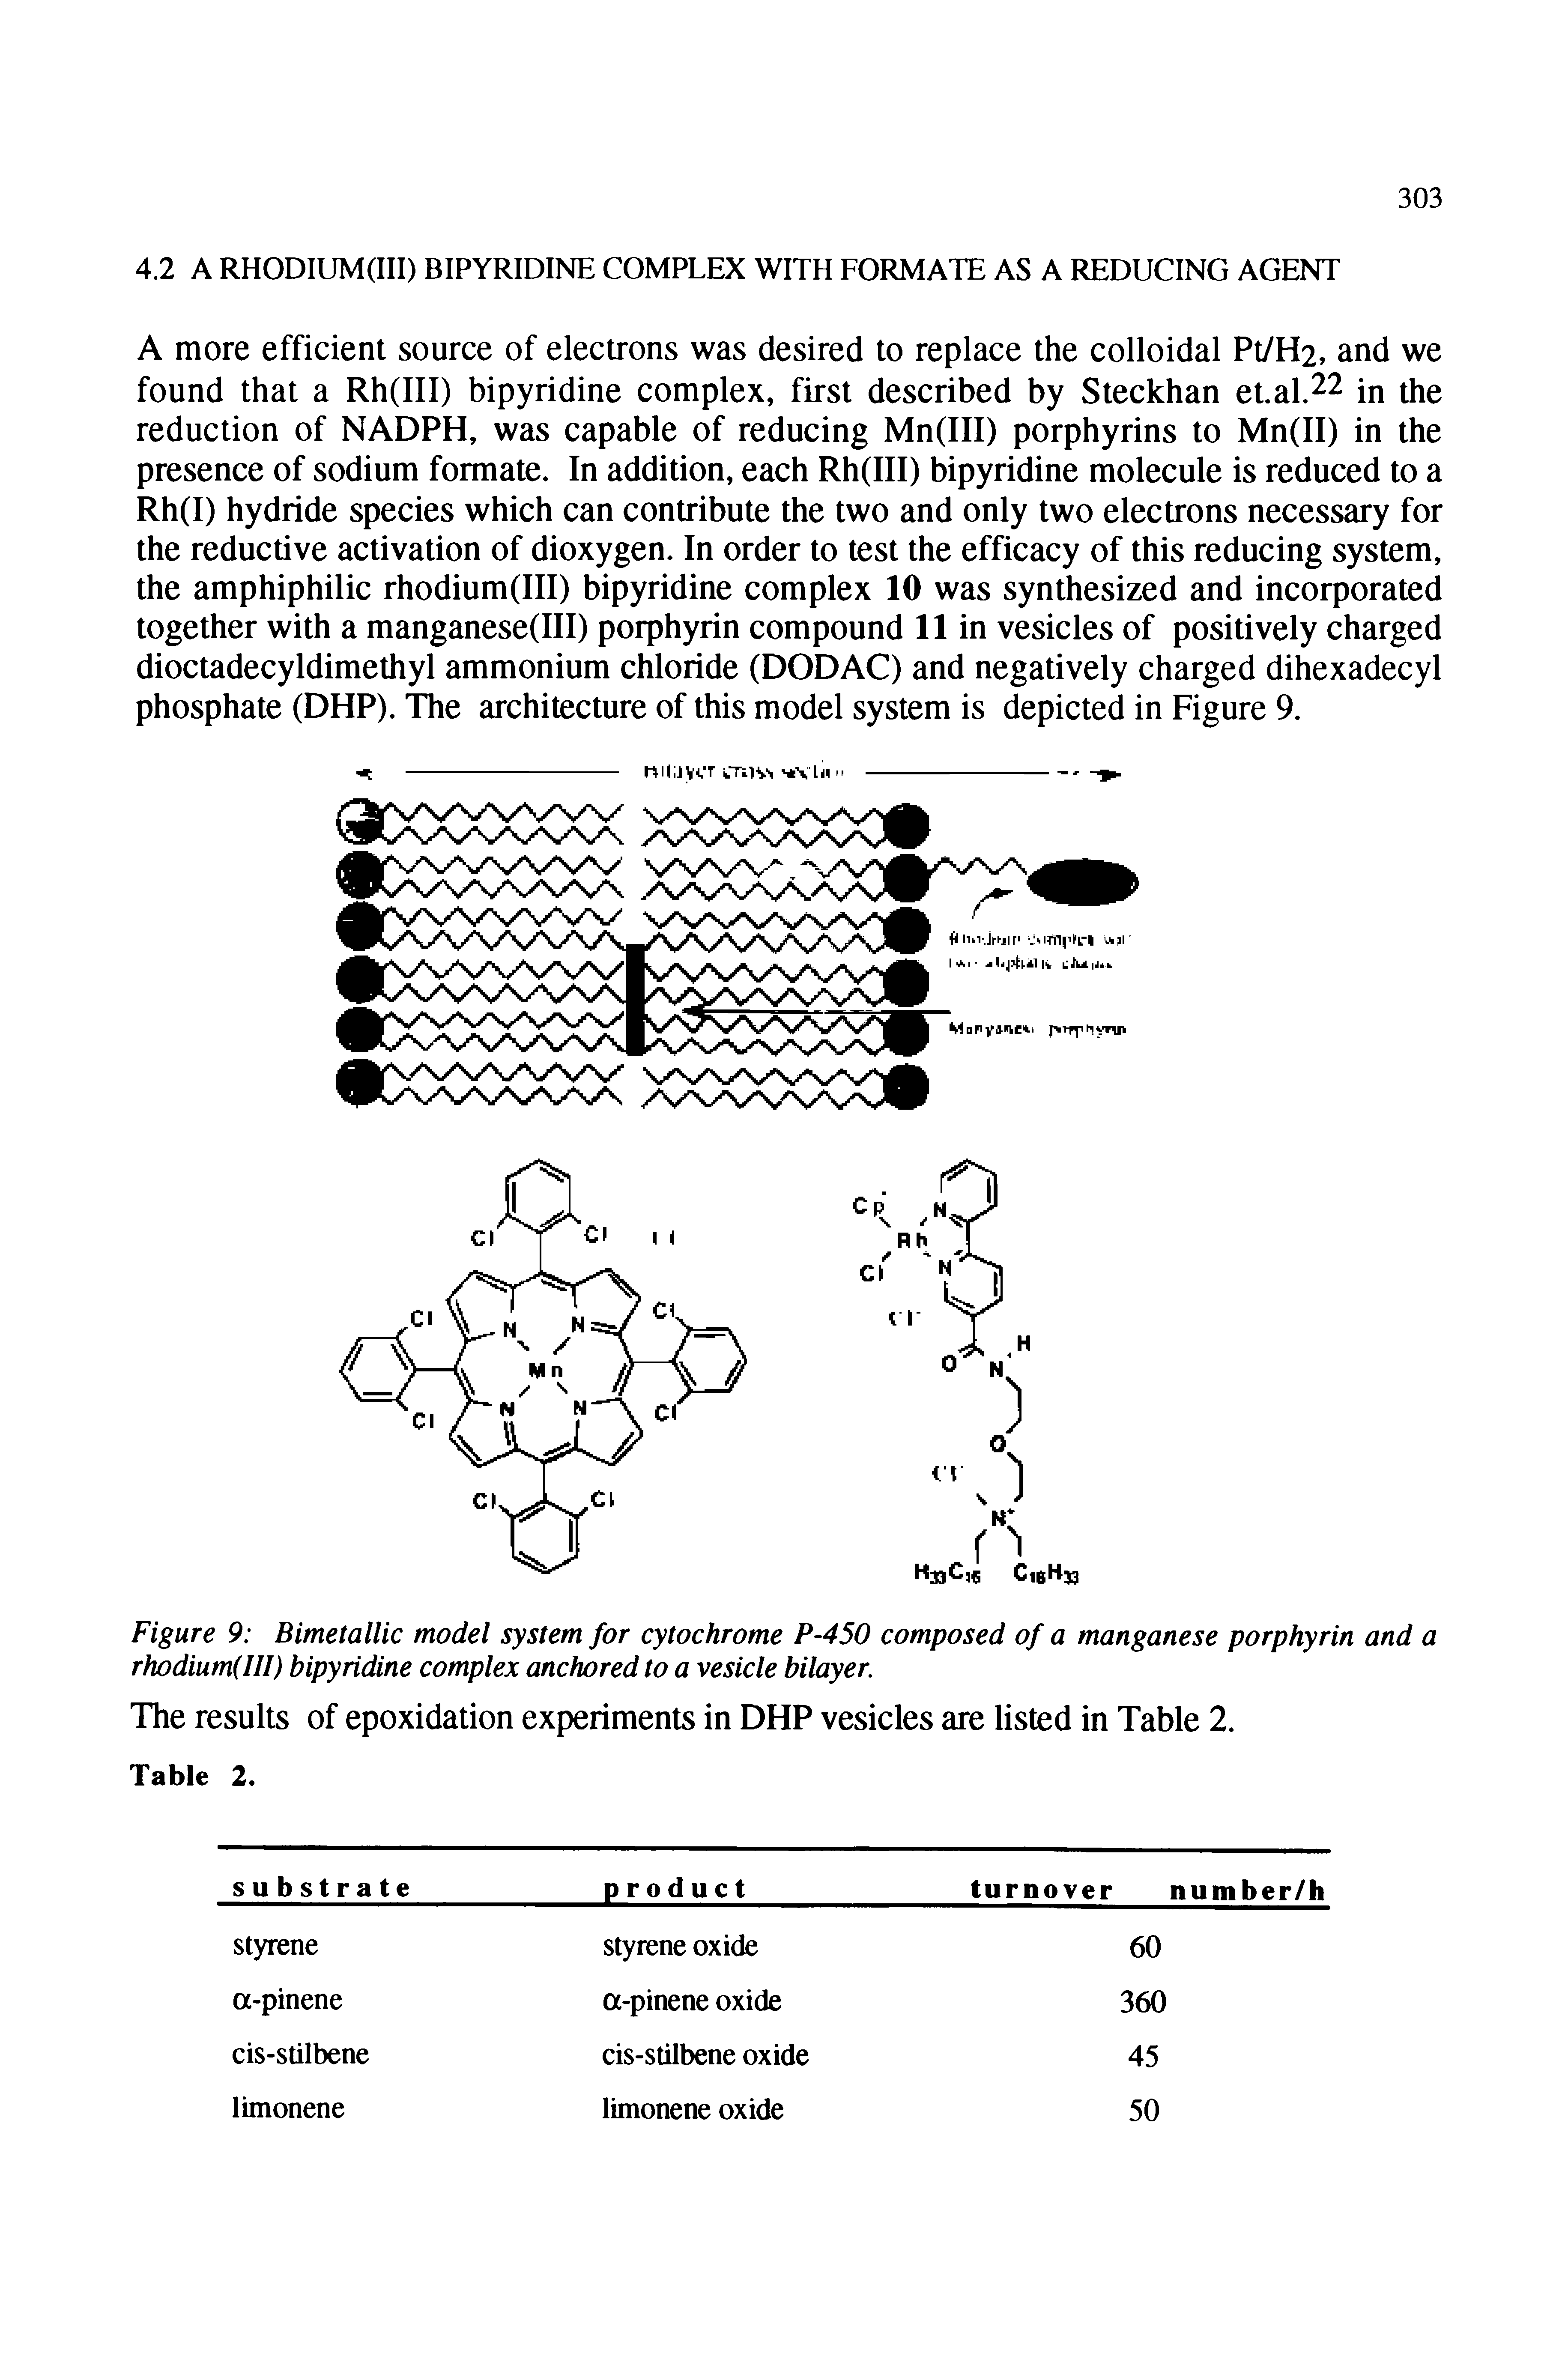 Figure 9 Bimetallic model system for cytochrome P-450 composed of a manganese porphyrin and a rhodium(III) bipyridine complex anchored to a vesicle bilayer.